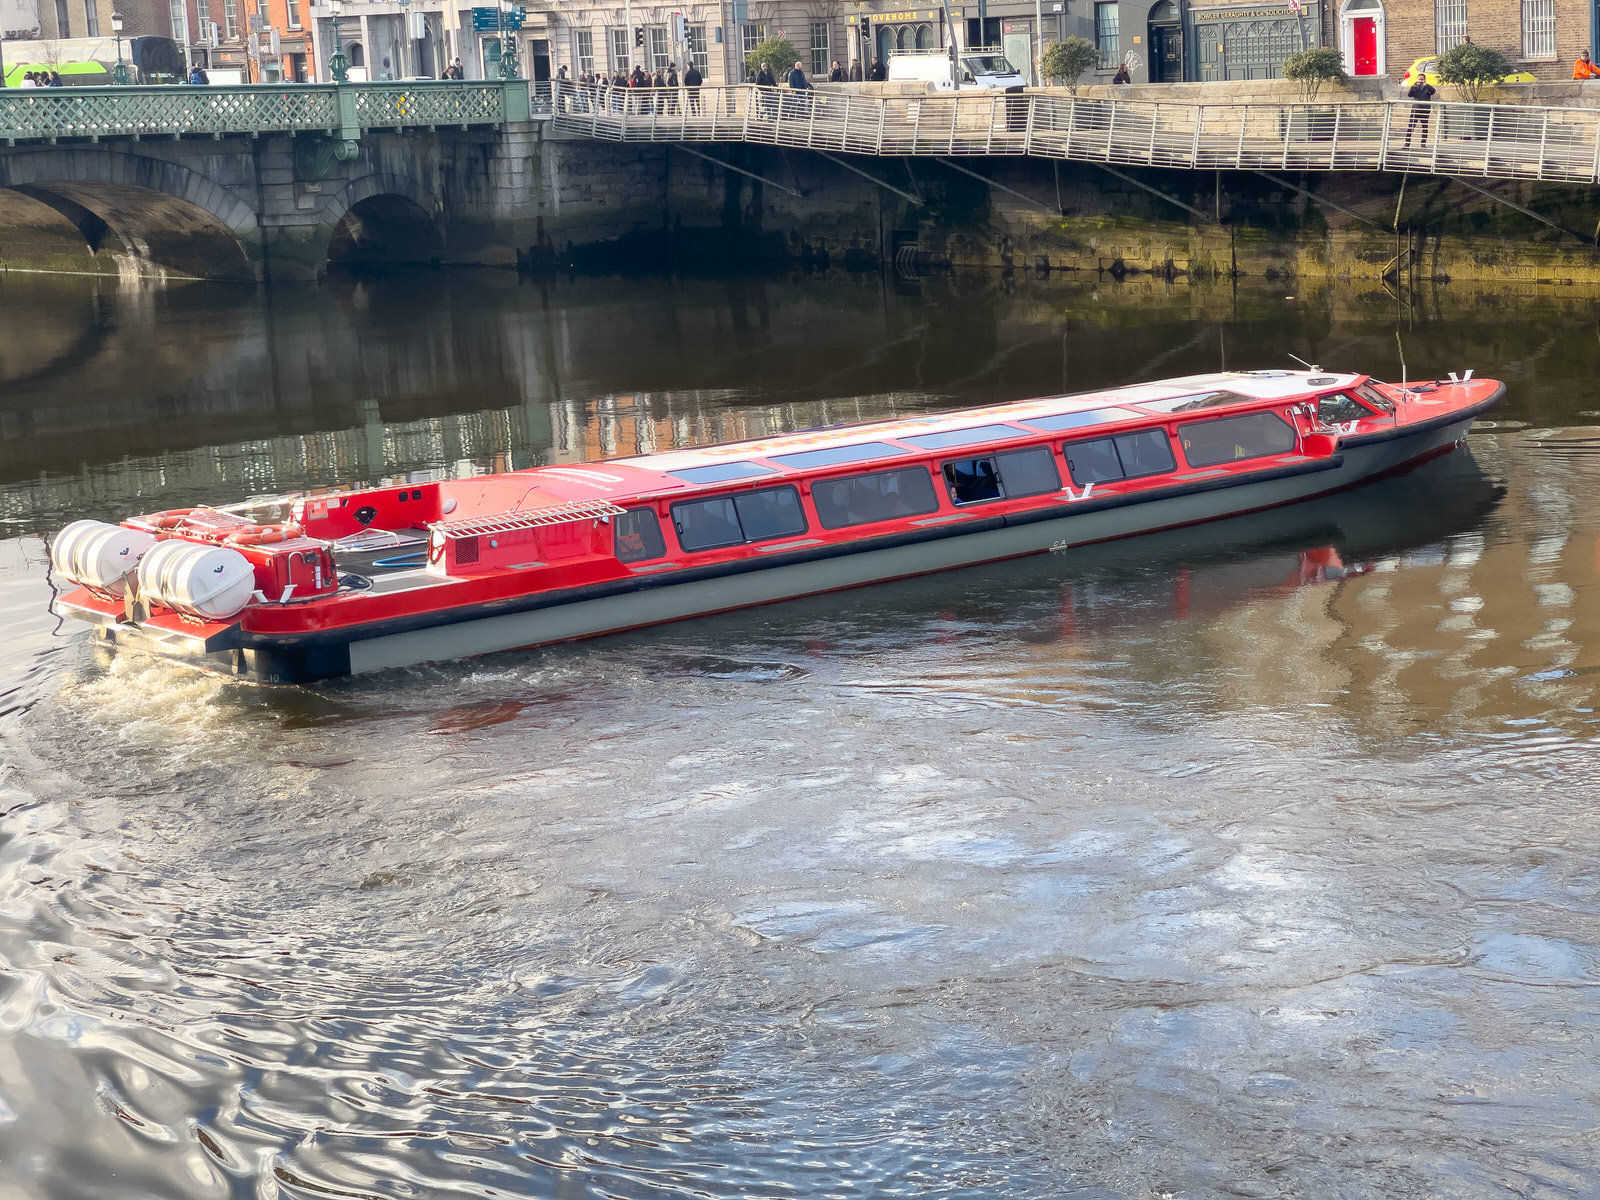 I HAD NOTHING BETTER TO DO [SO I PHOTOGRAPHED THE SPIRIT OF THE DOCKLANDS TURNING ON THE RIVER LIFFEY]-229456-1